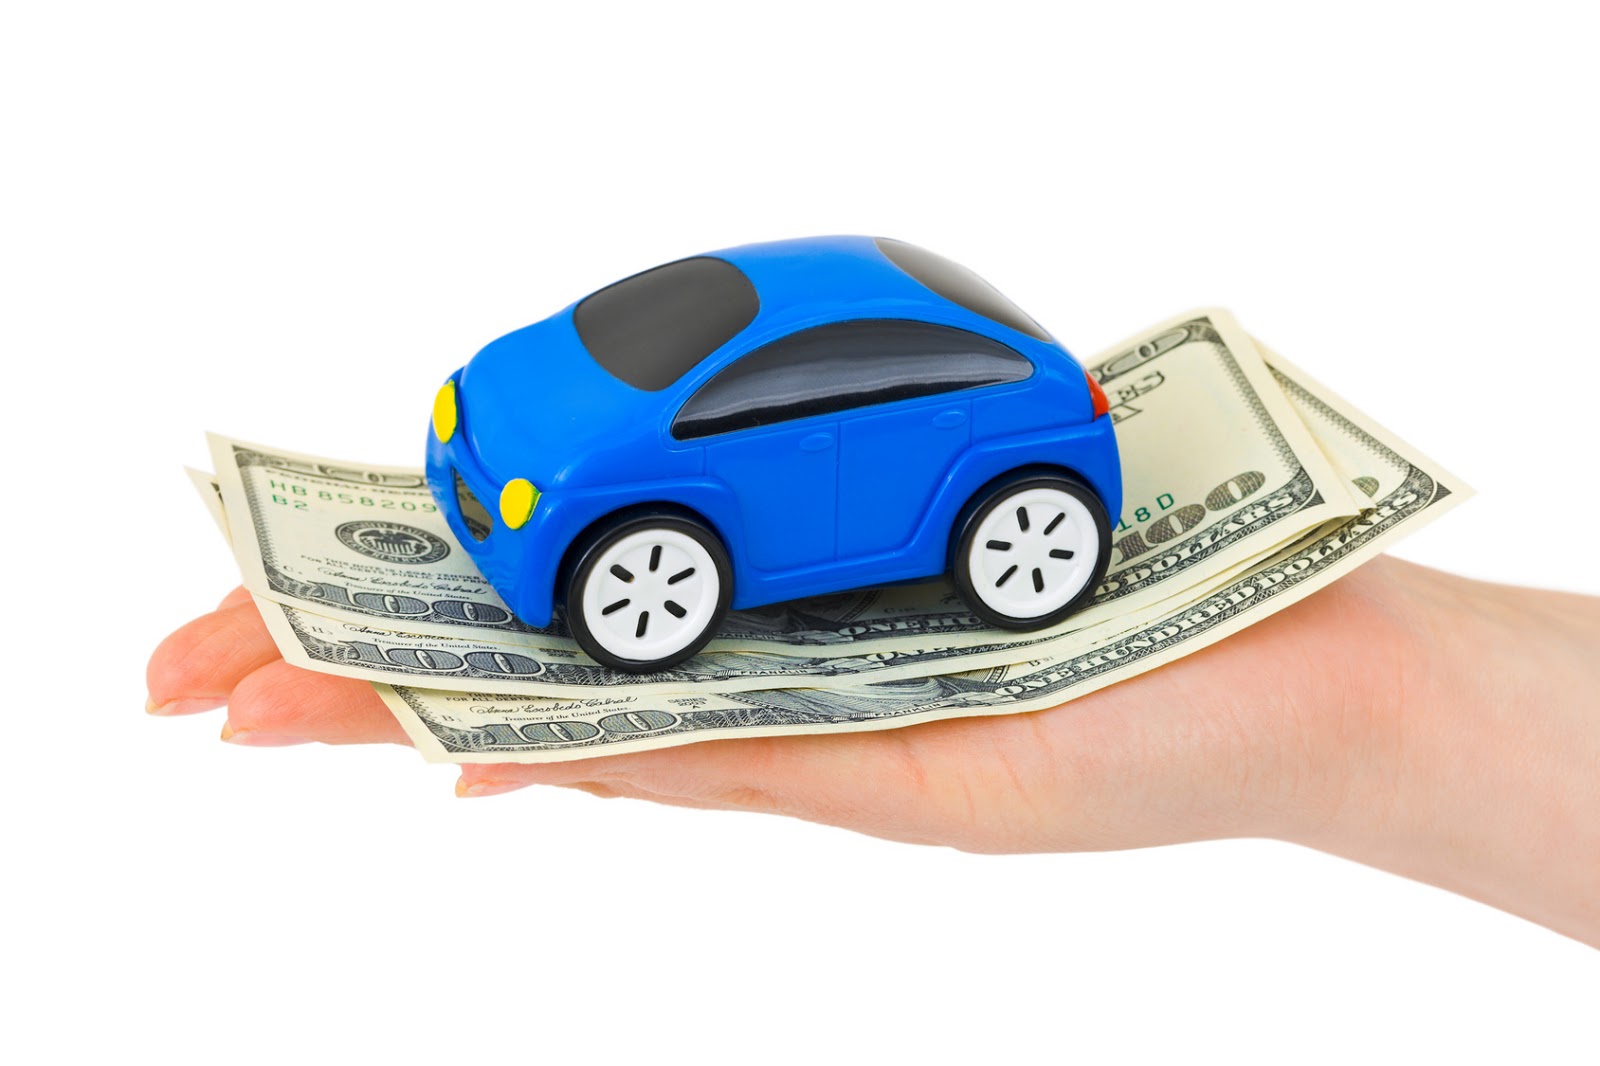 ... car insurance coverage without choosing any deductibles there has